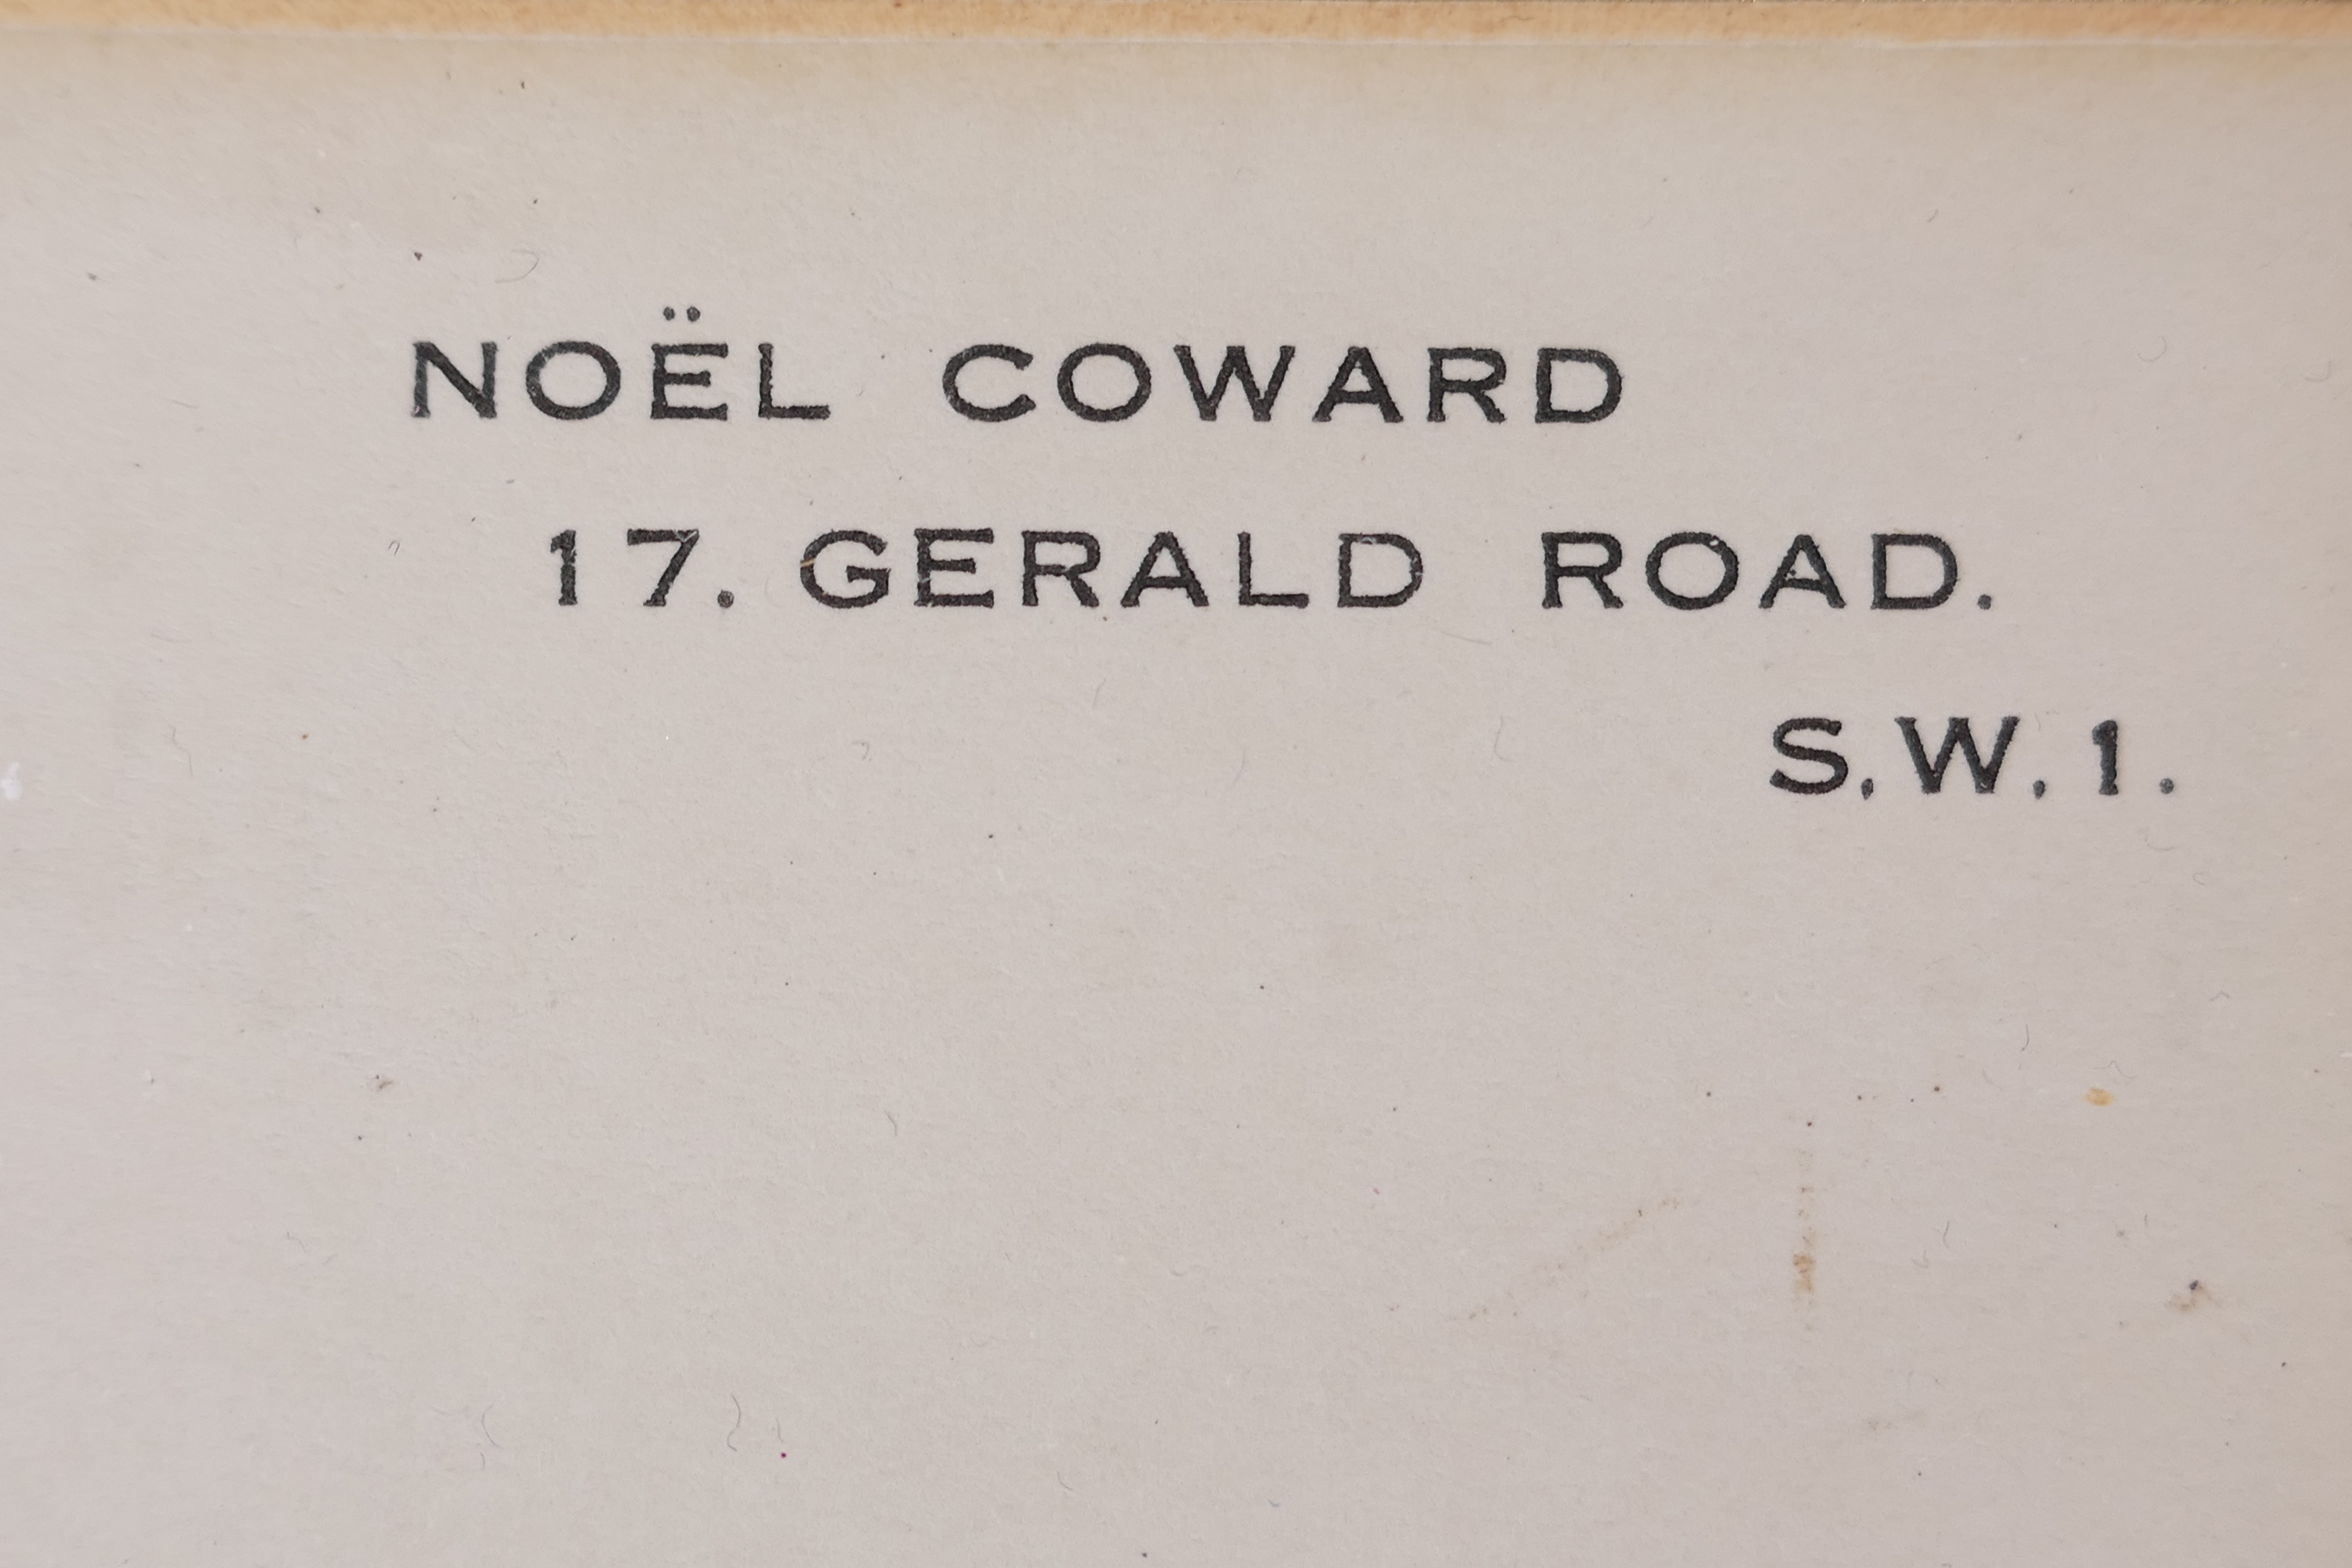 Noel Coward (British, 1899-1973) – British playwright, actor, composer, director and singer, - Image 9 of 9